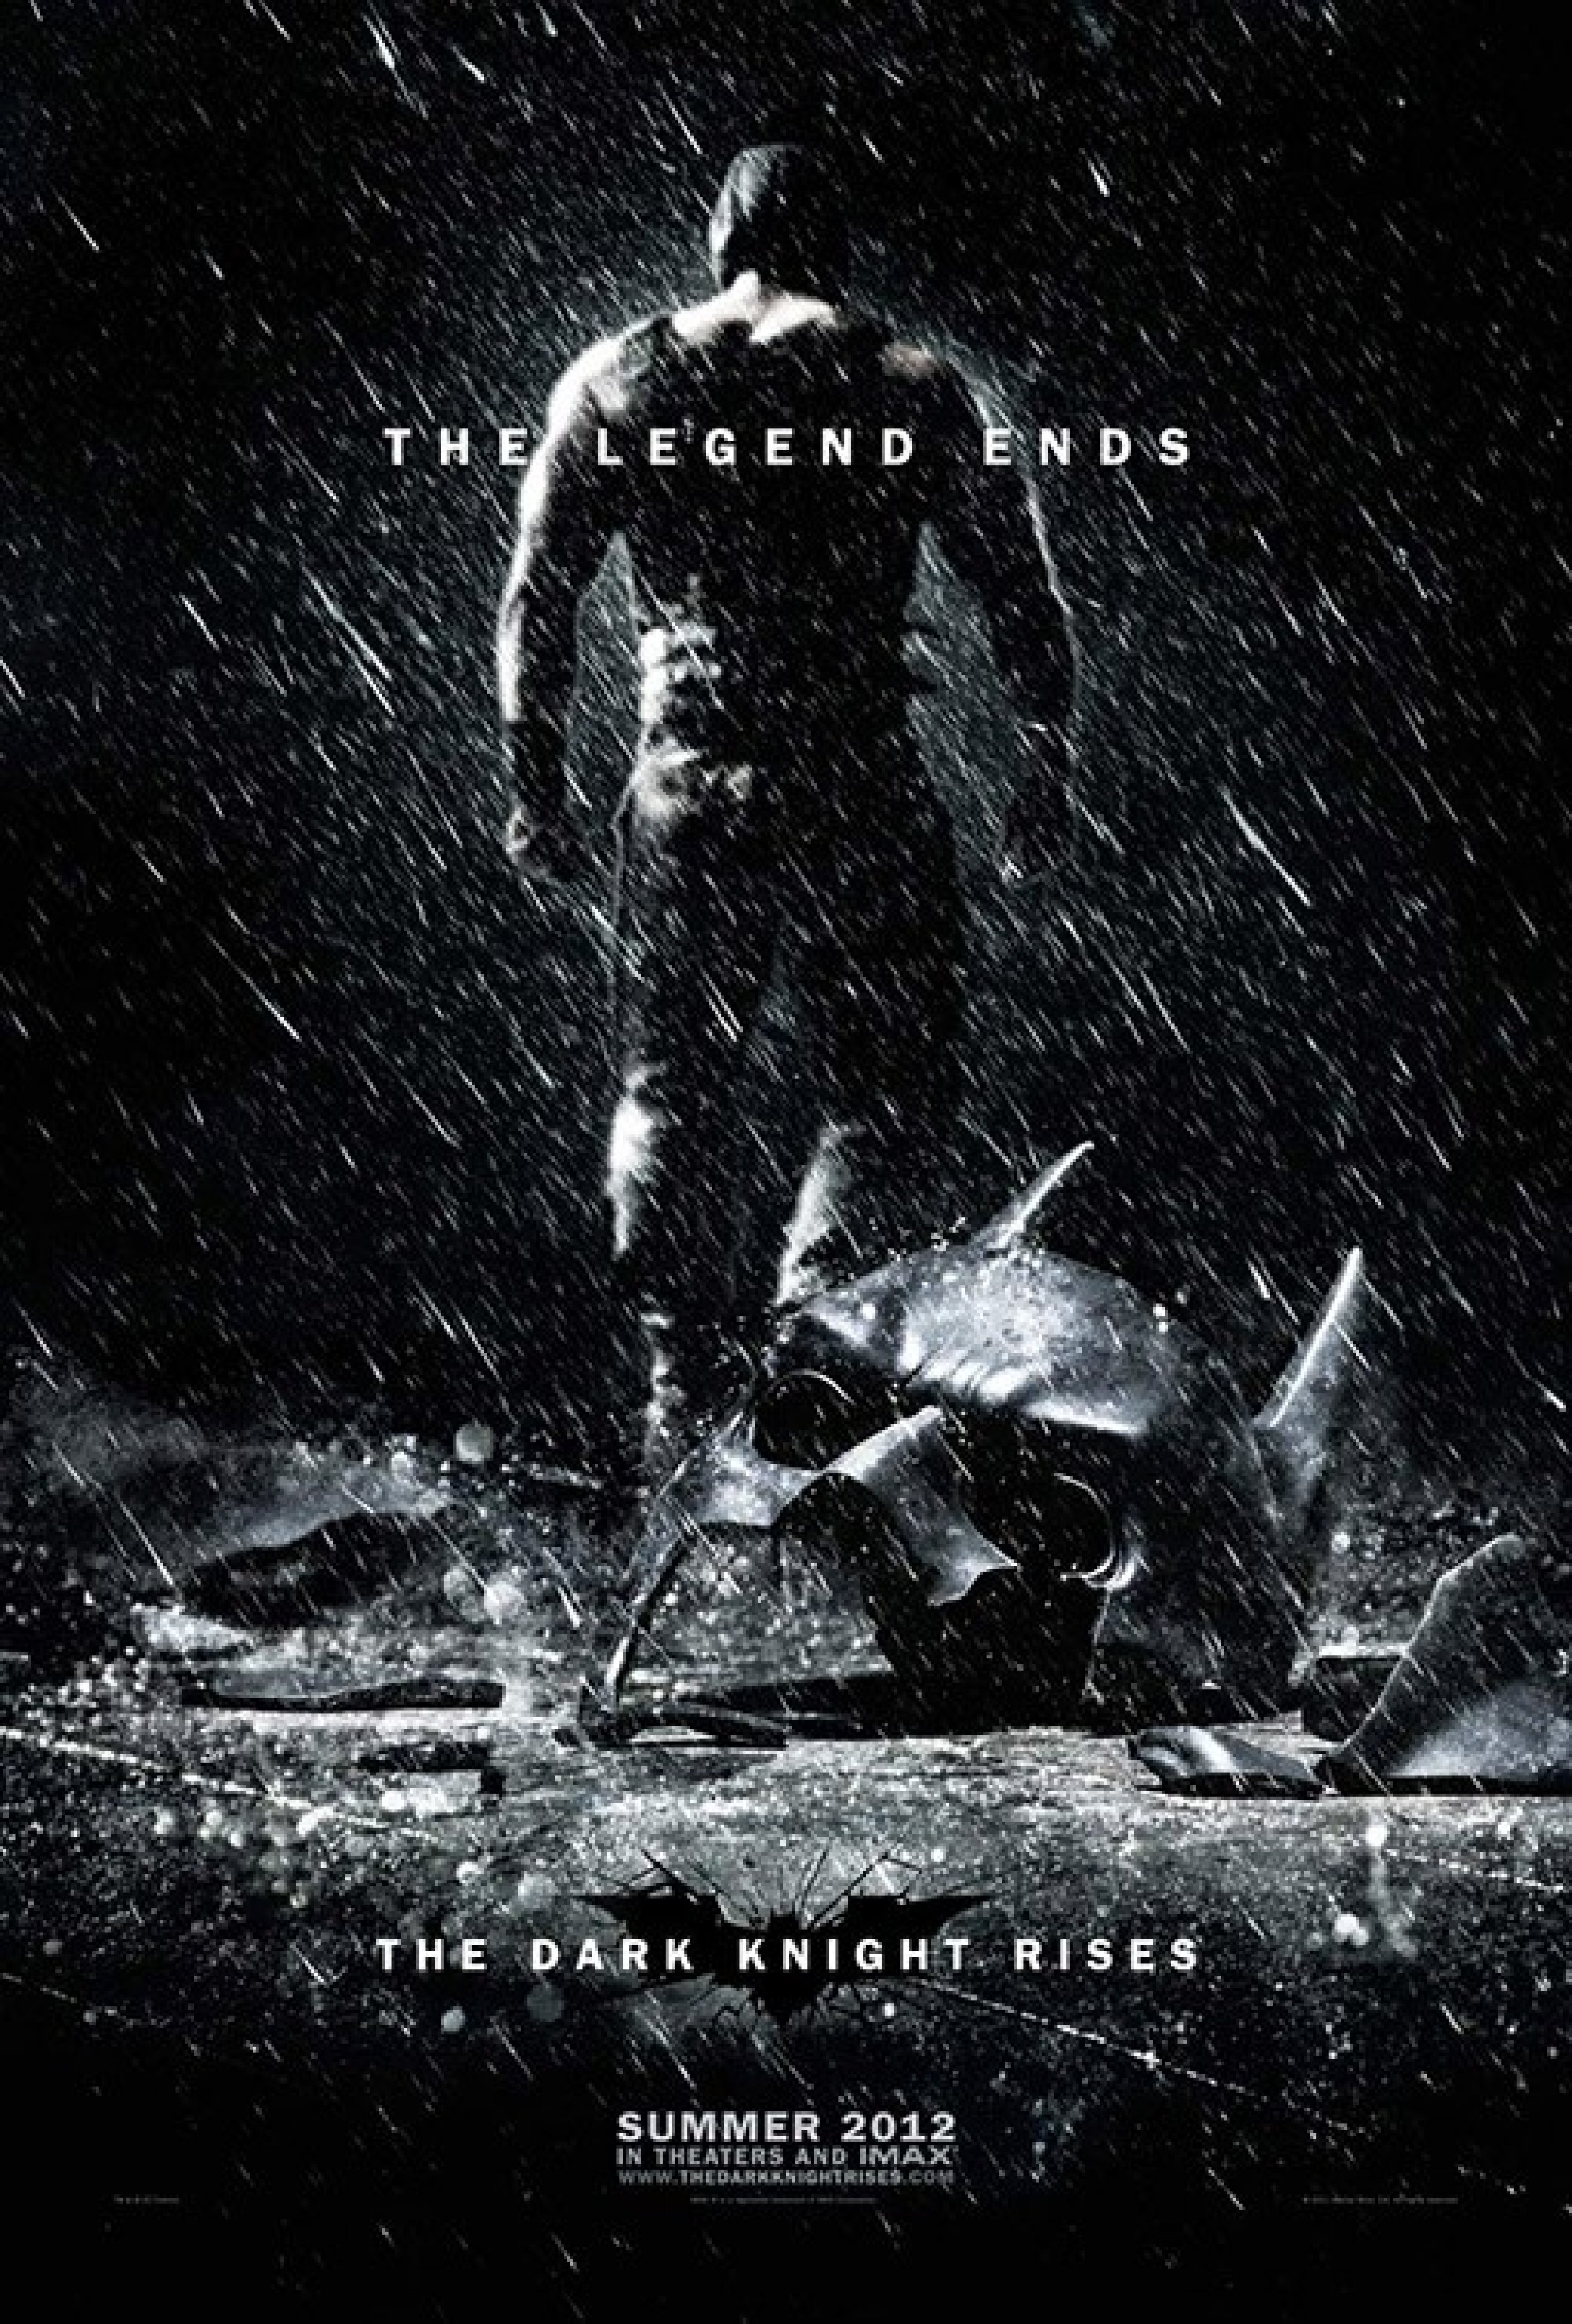 Watch Final Dark Knight Rises Trailer Released Online, To Be Shown Before Avengers VIDEO